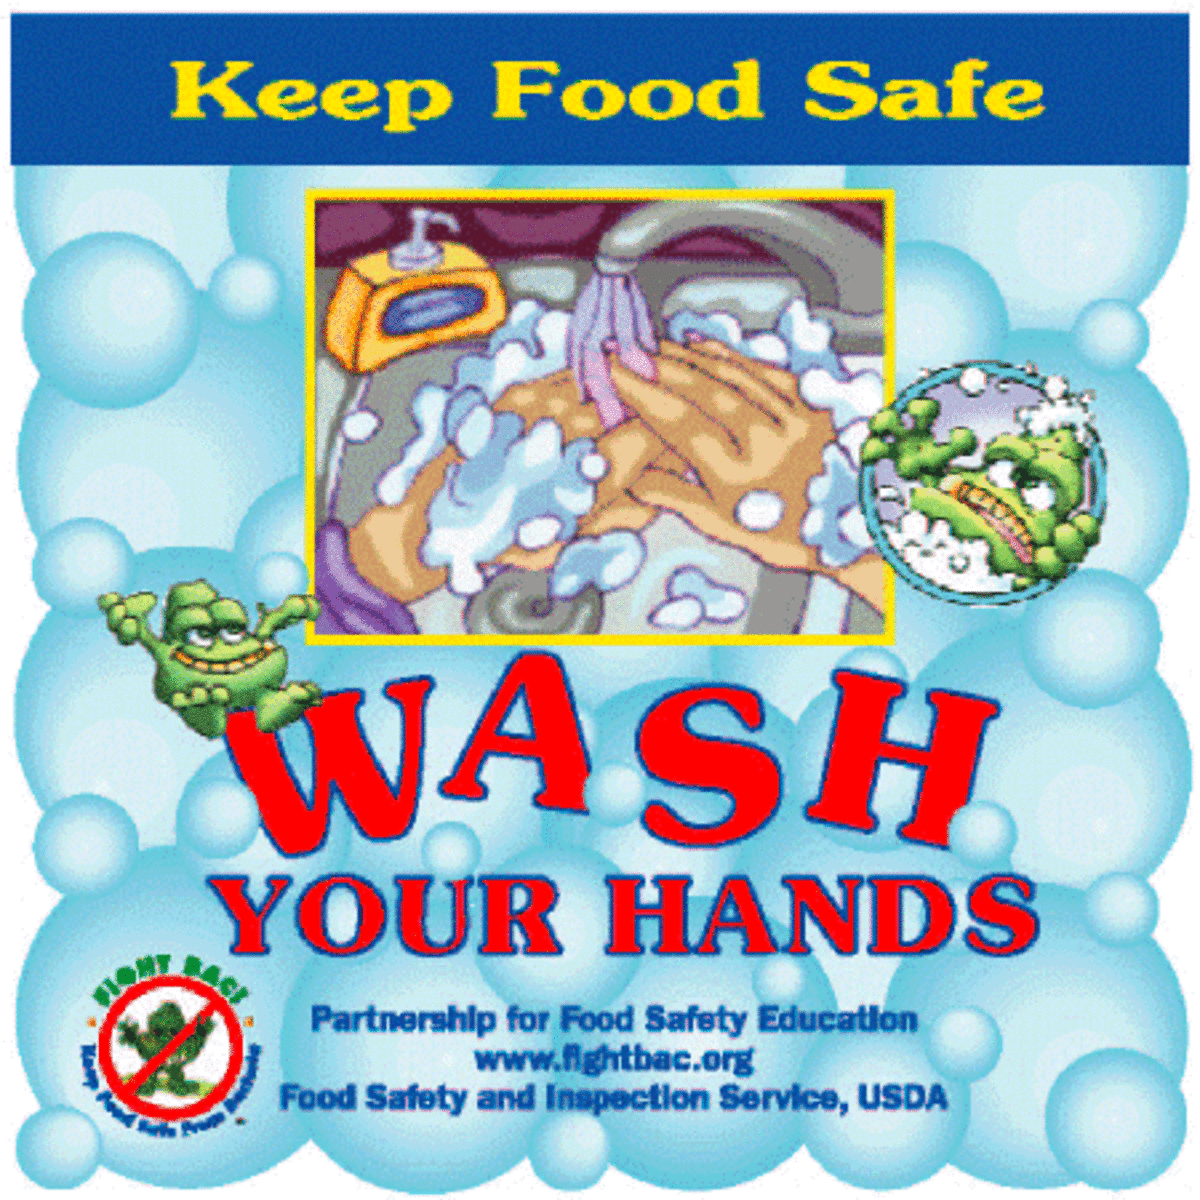 Food Safety Guidelines in Our Home